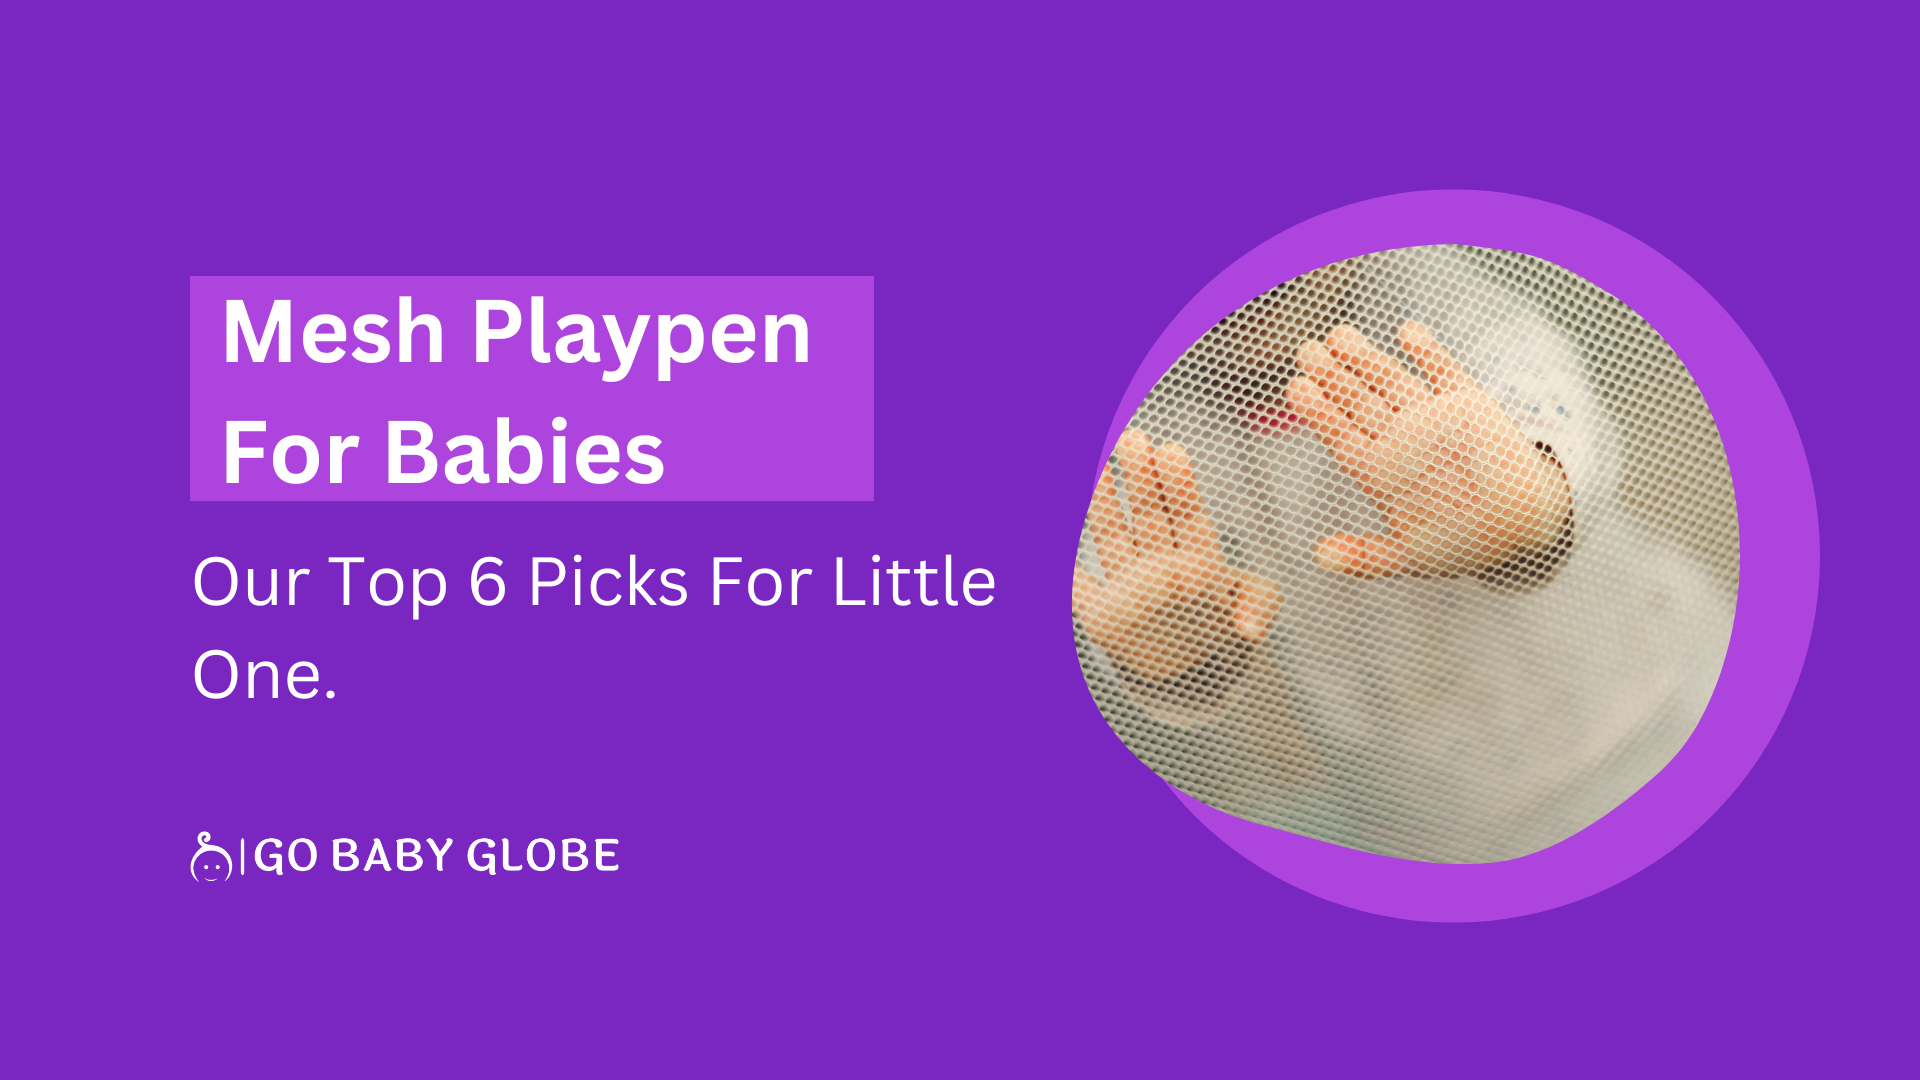 : Our Top 6 Picks For Little One.